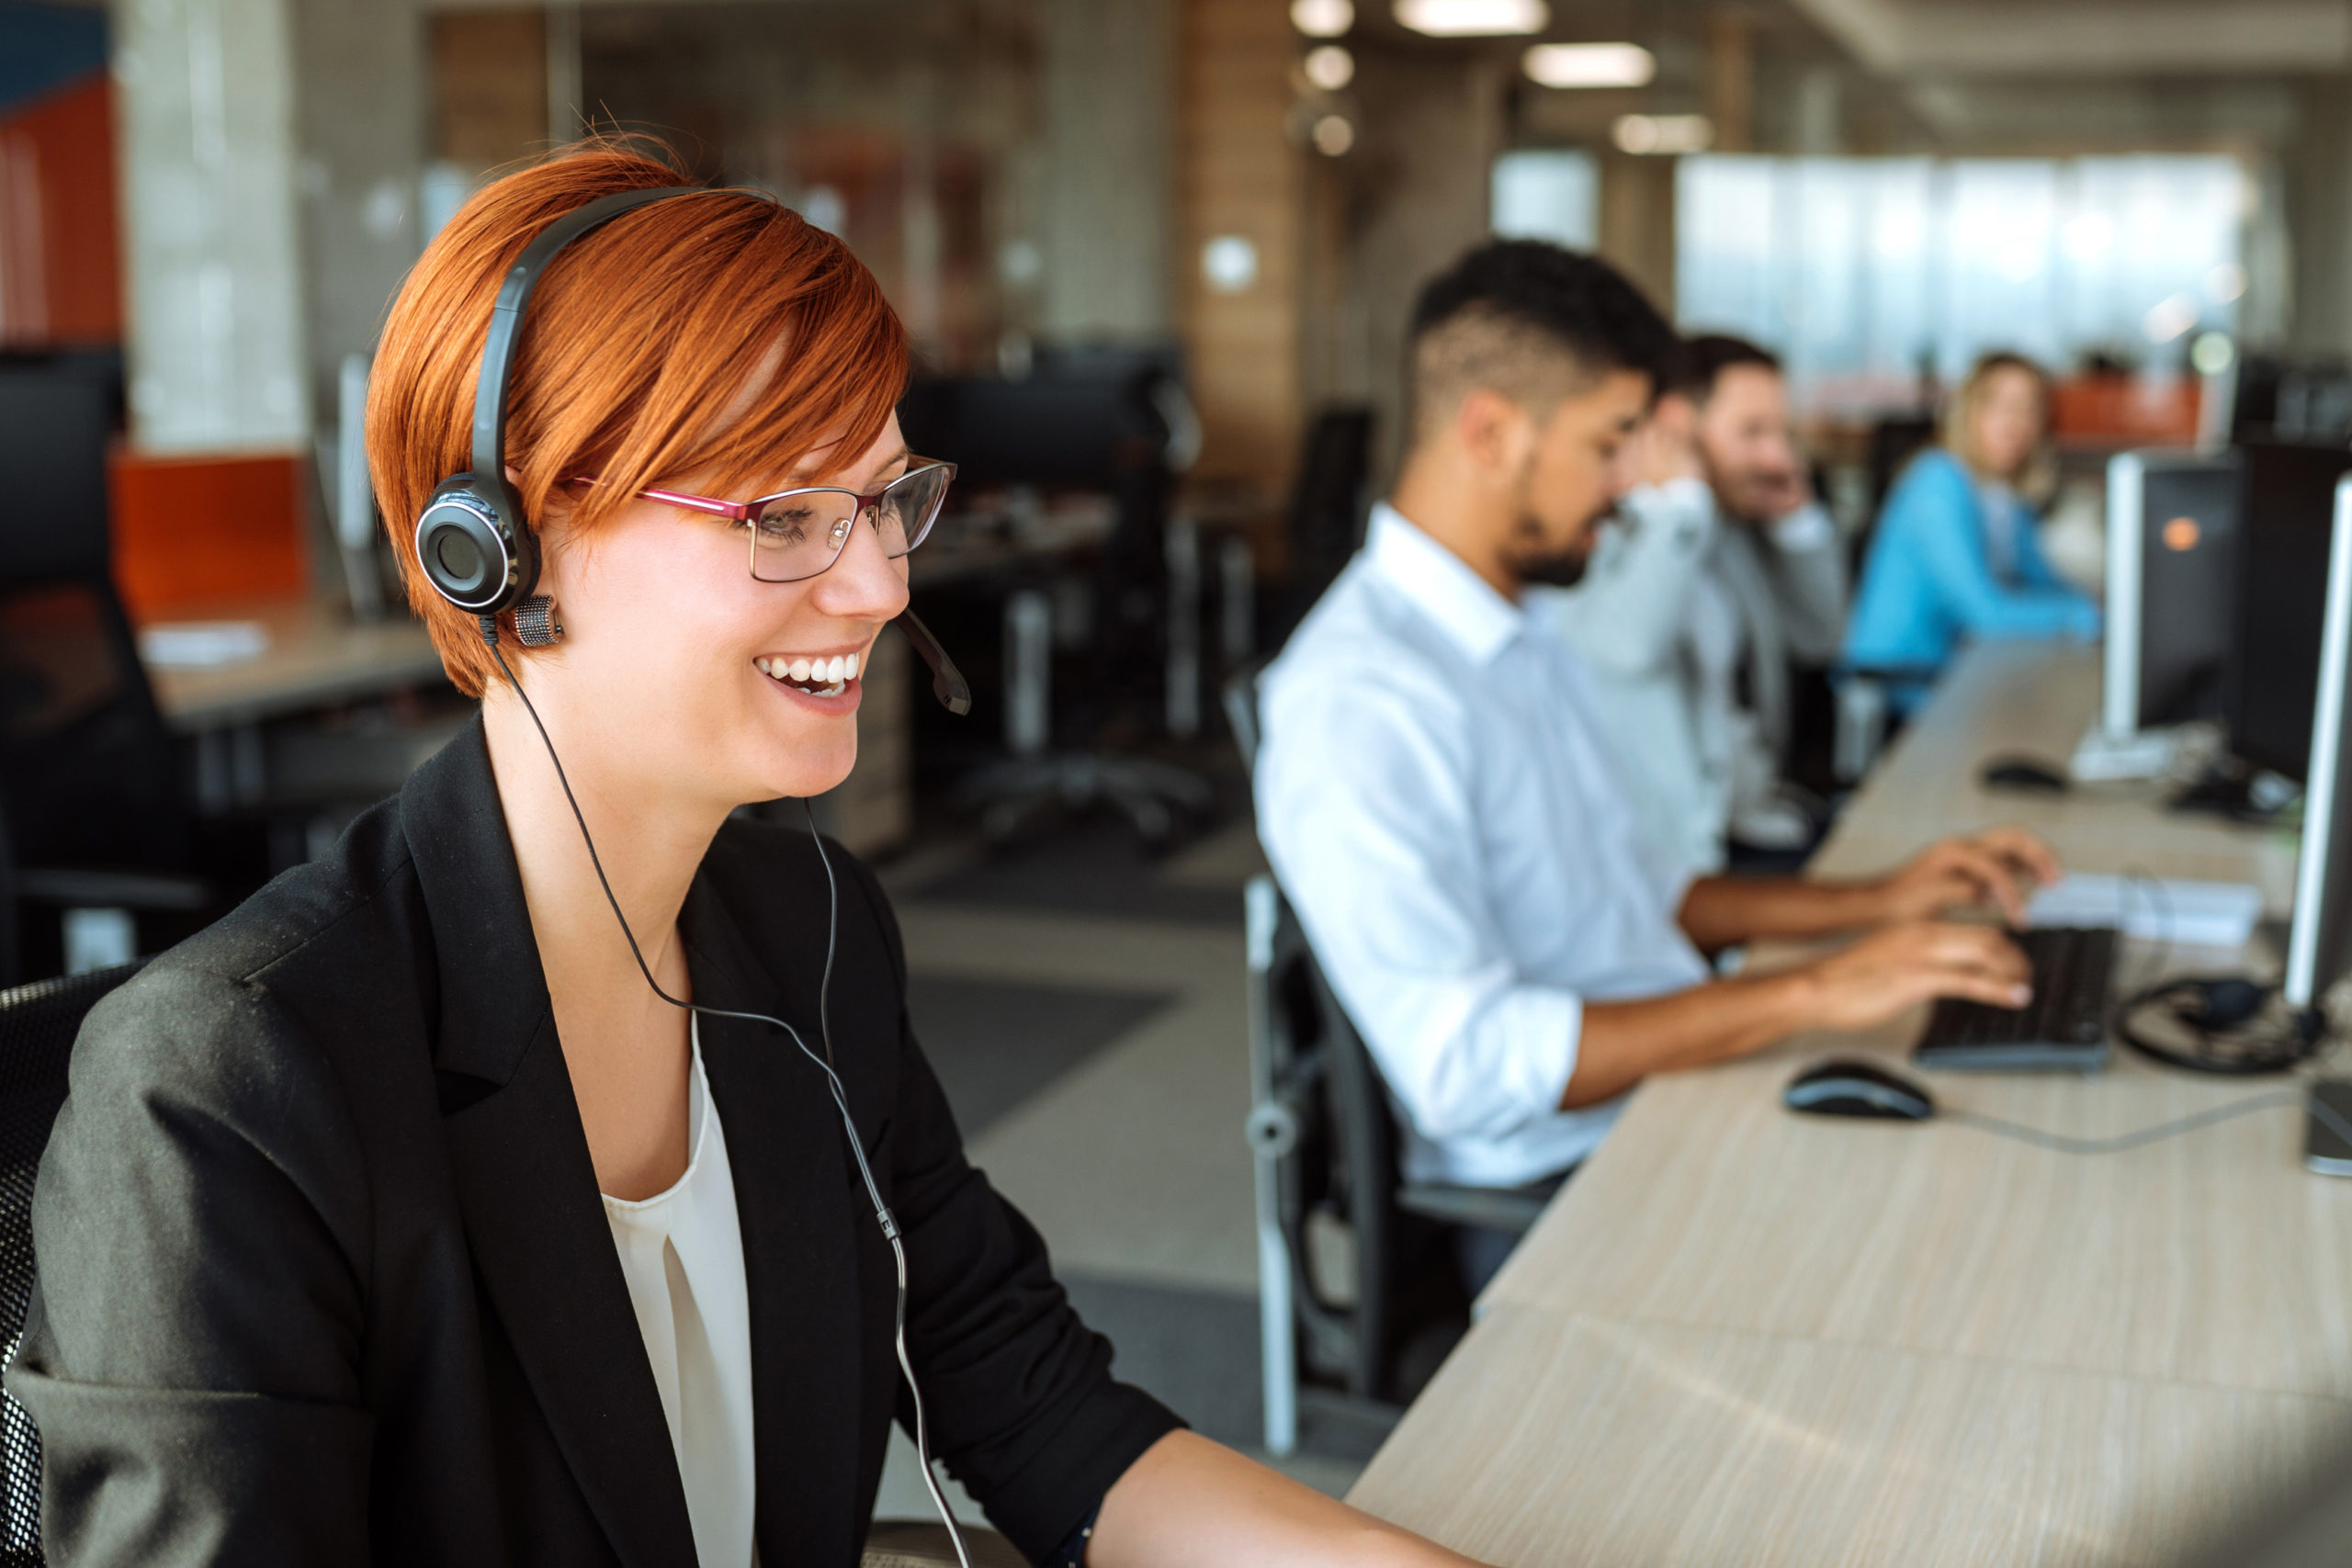 pbx services people who are service providers working in a call center